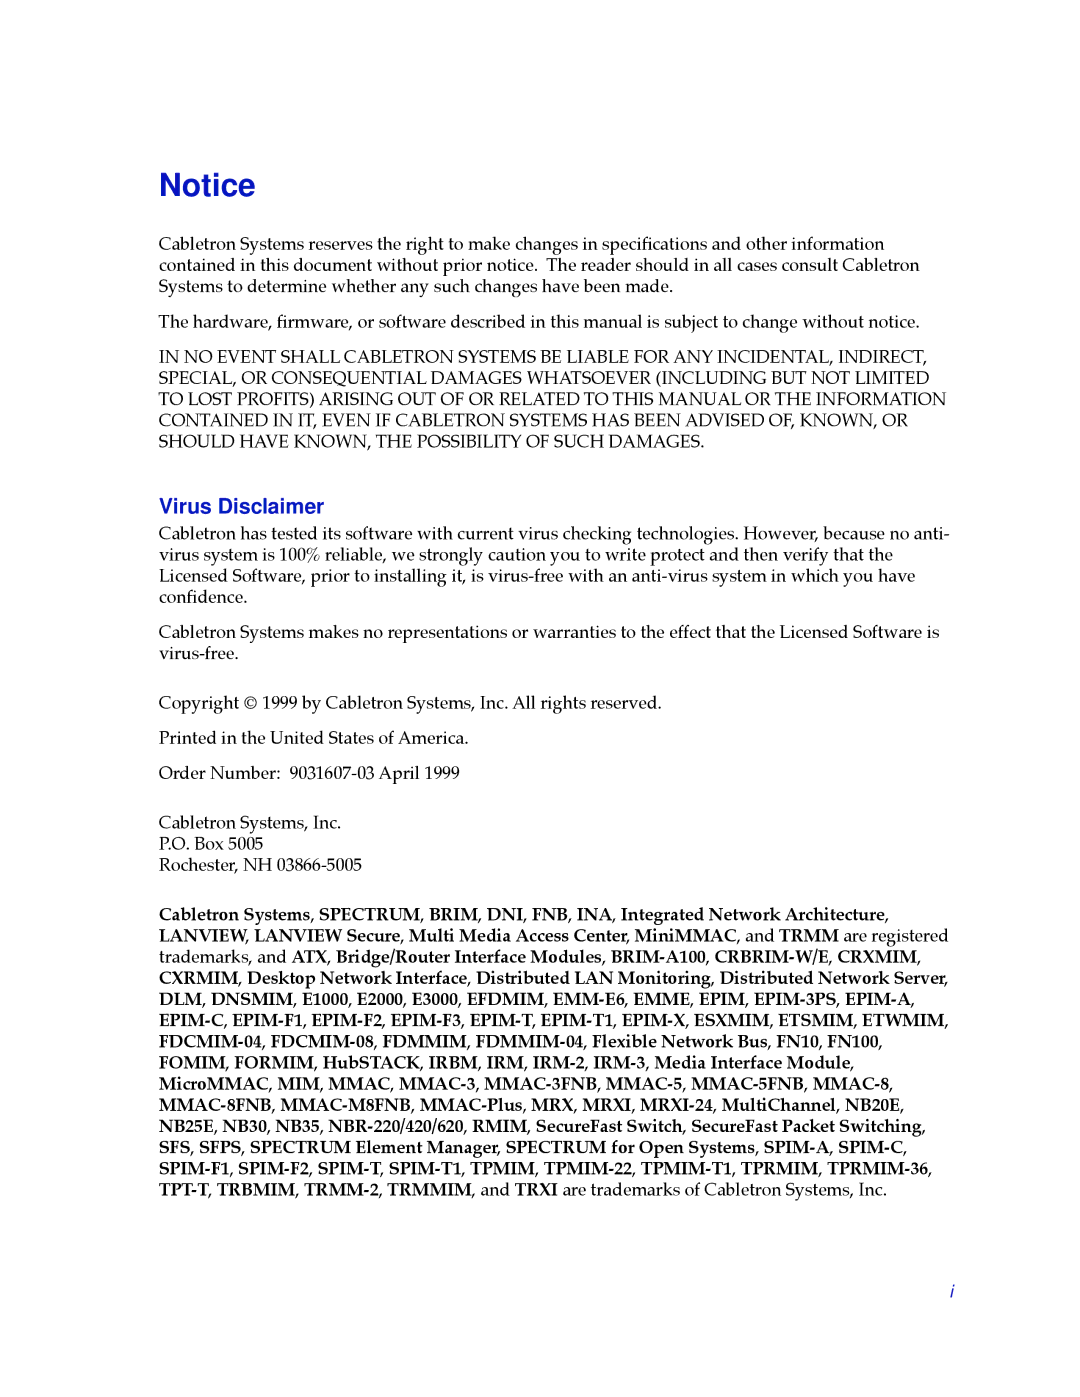 Cabletron Systems NB30 manual Virus Disclaimer 